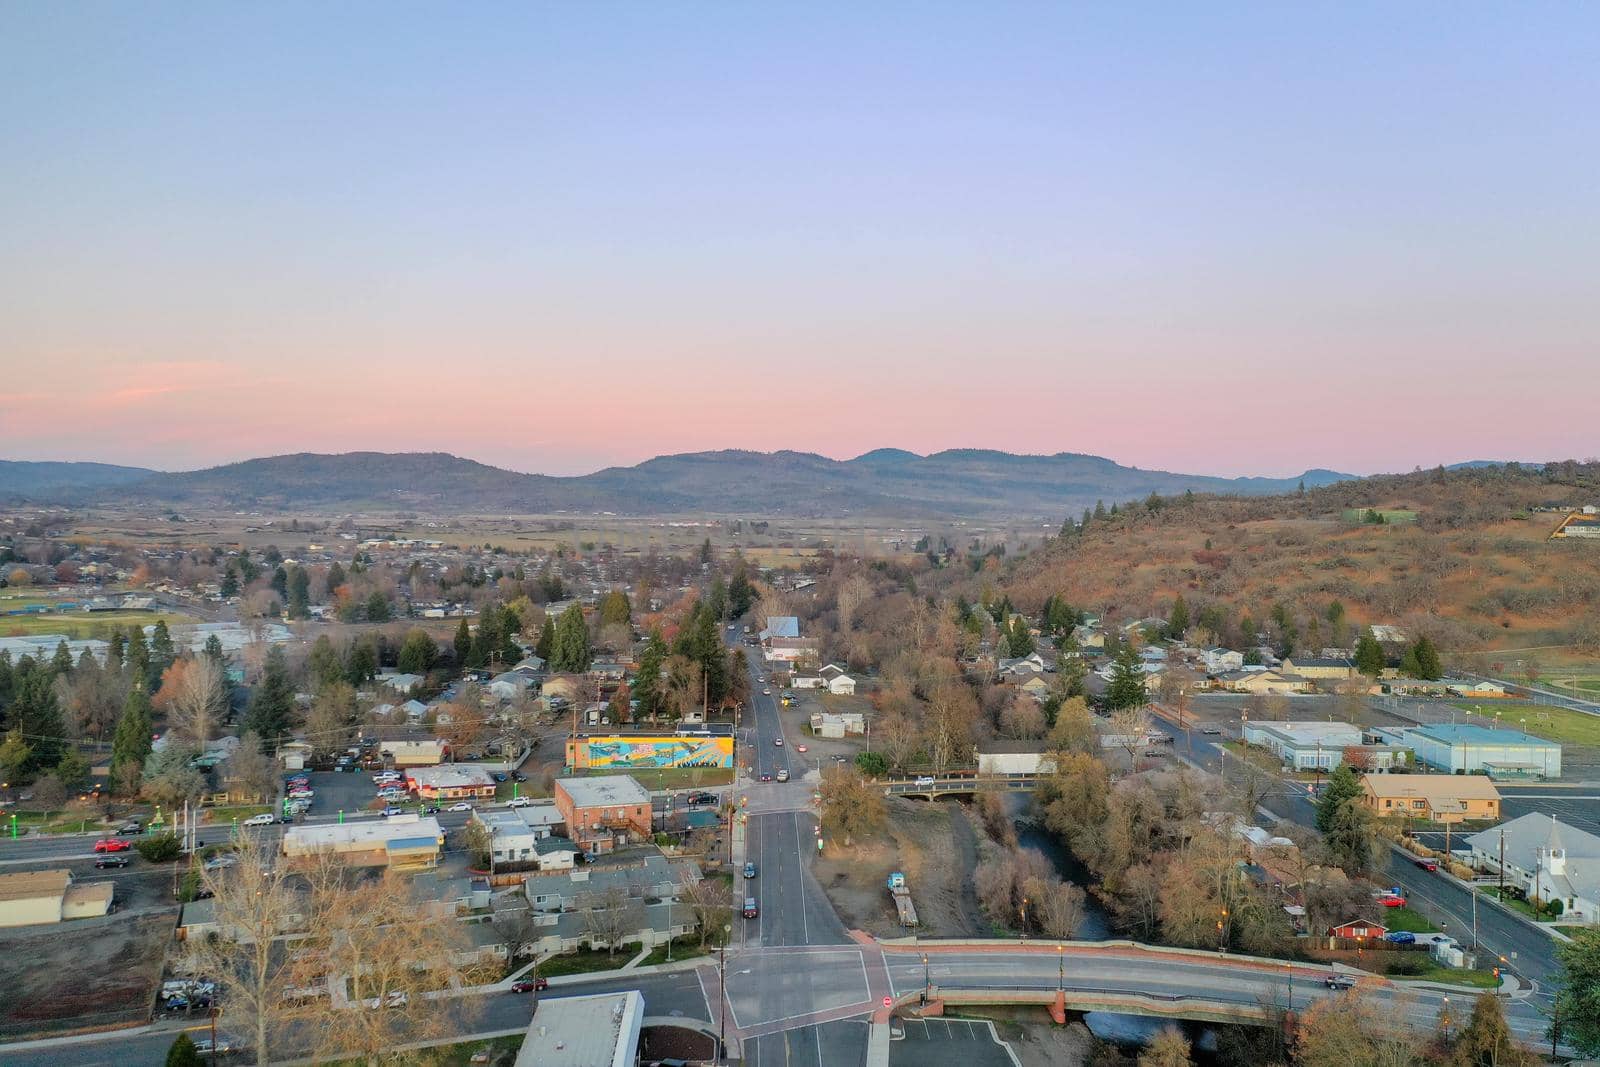 Peaceful town surrounded by trees with mountains as background during sunset. Aerial view of roads surrounded by autumn-colored nature. Rural town landscape